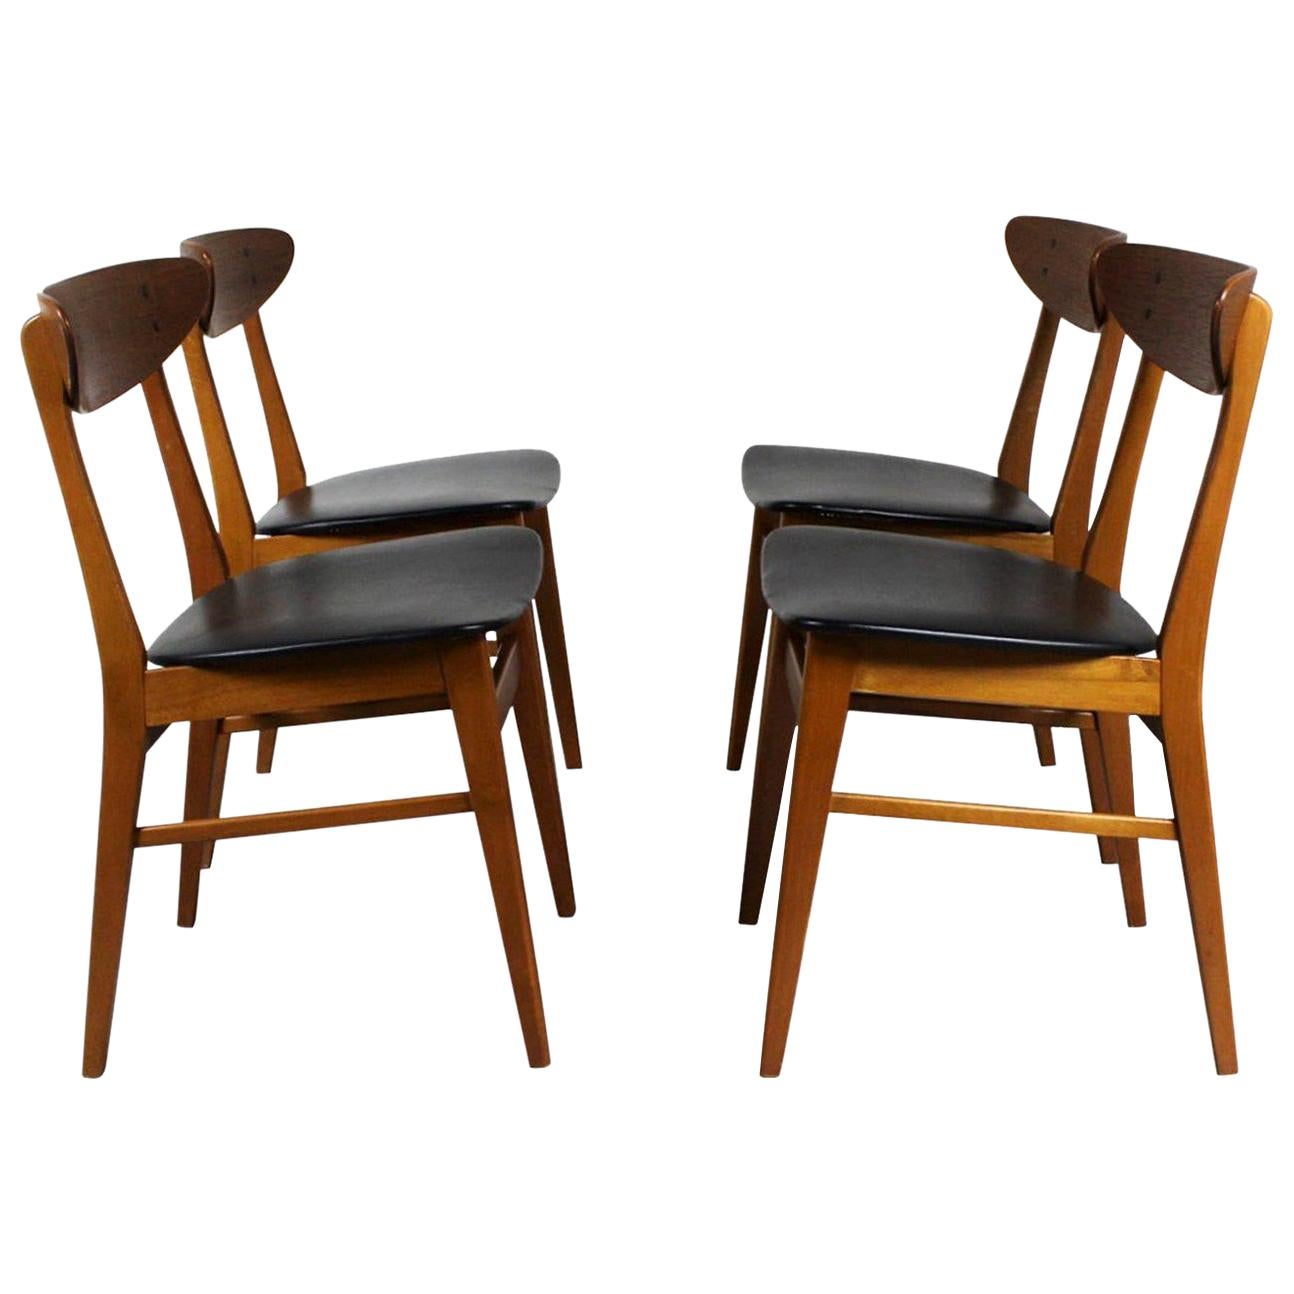 1960s Set of Four Teak Dining Chairs, Denmark For Sale